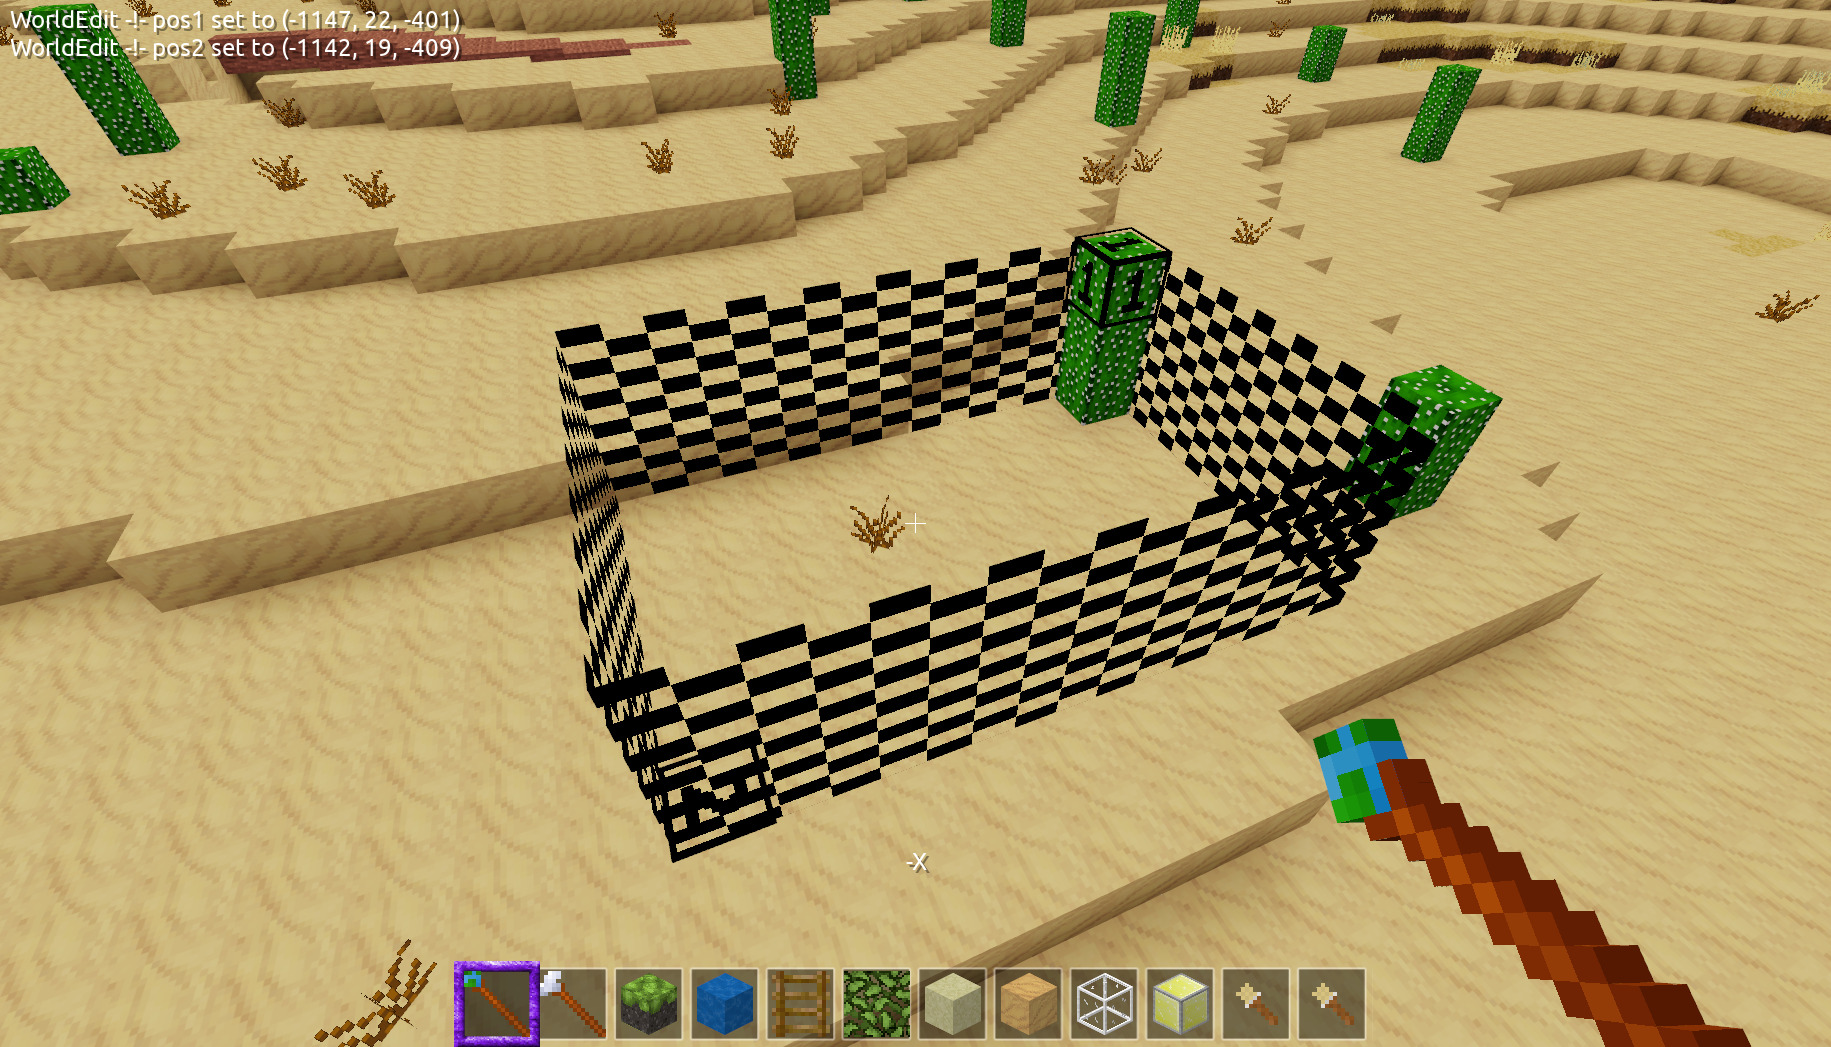 A screenshot showing WorldEdit points 1 and 2 in a desert with a cactus